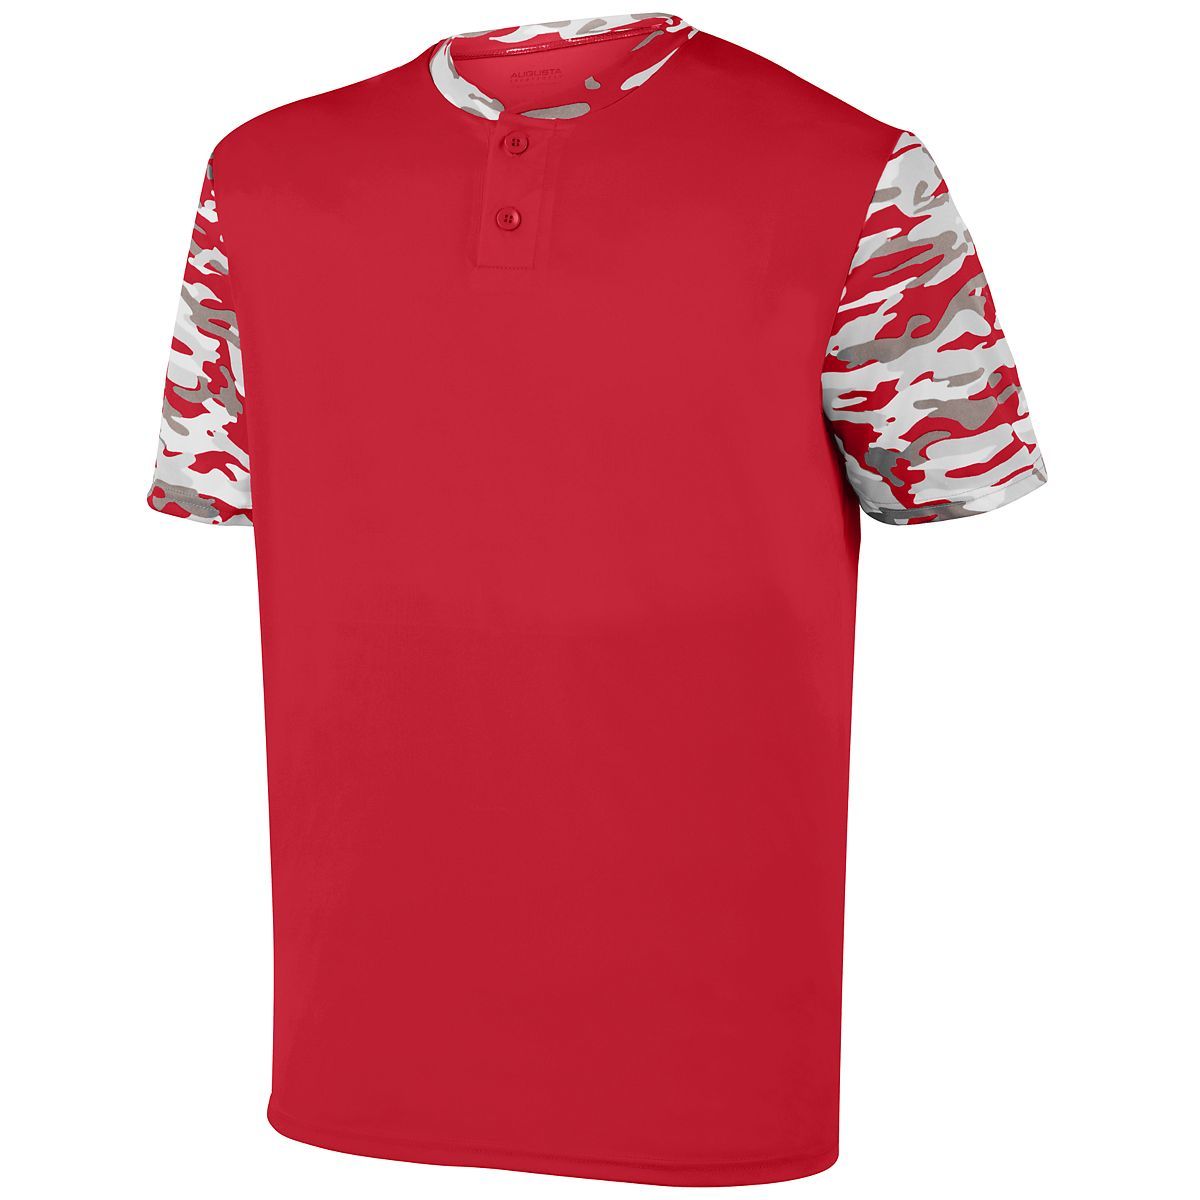 Augusta Sportswear Pop Fly Jersey in Red/Red Mod  -Part of the Adult, Adult-Jersey, Augusta-Products, Baseball, Shirts, All-Sports, All-Sports-1 product lines at KanaleyCreations.com